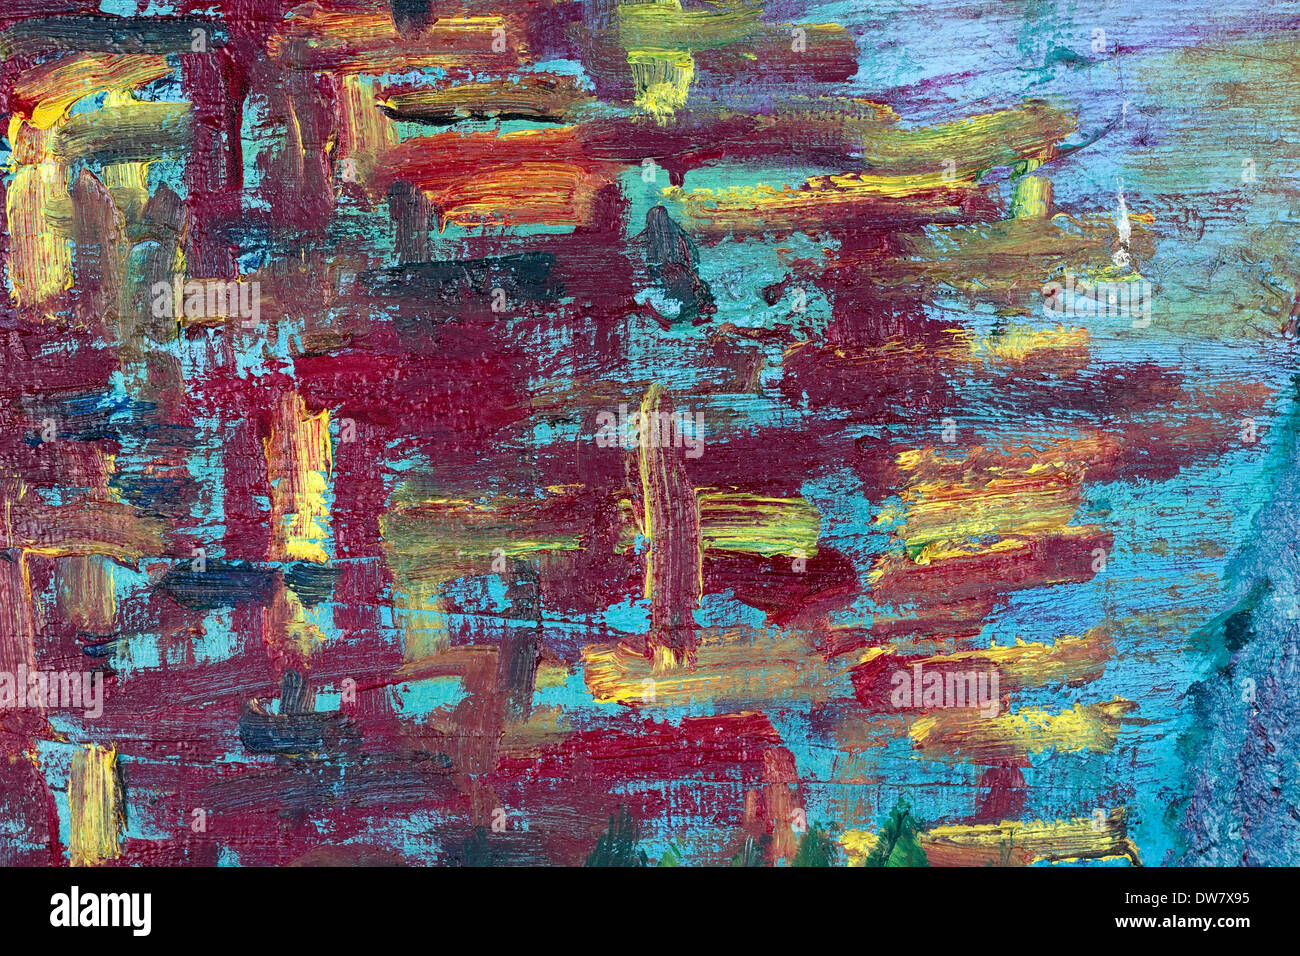 Abstract oil paints on canvas. Broad brush strokes of red paint on a blue background. Handmade art closeup Stock Photo